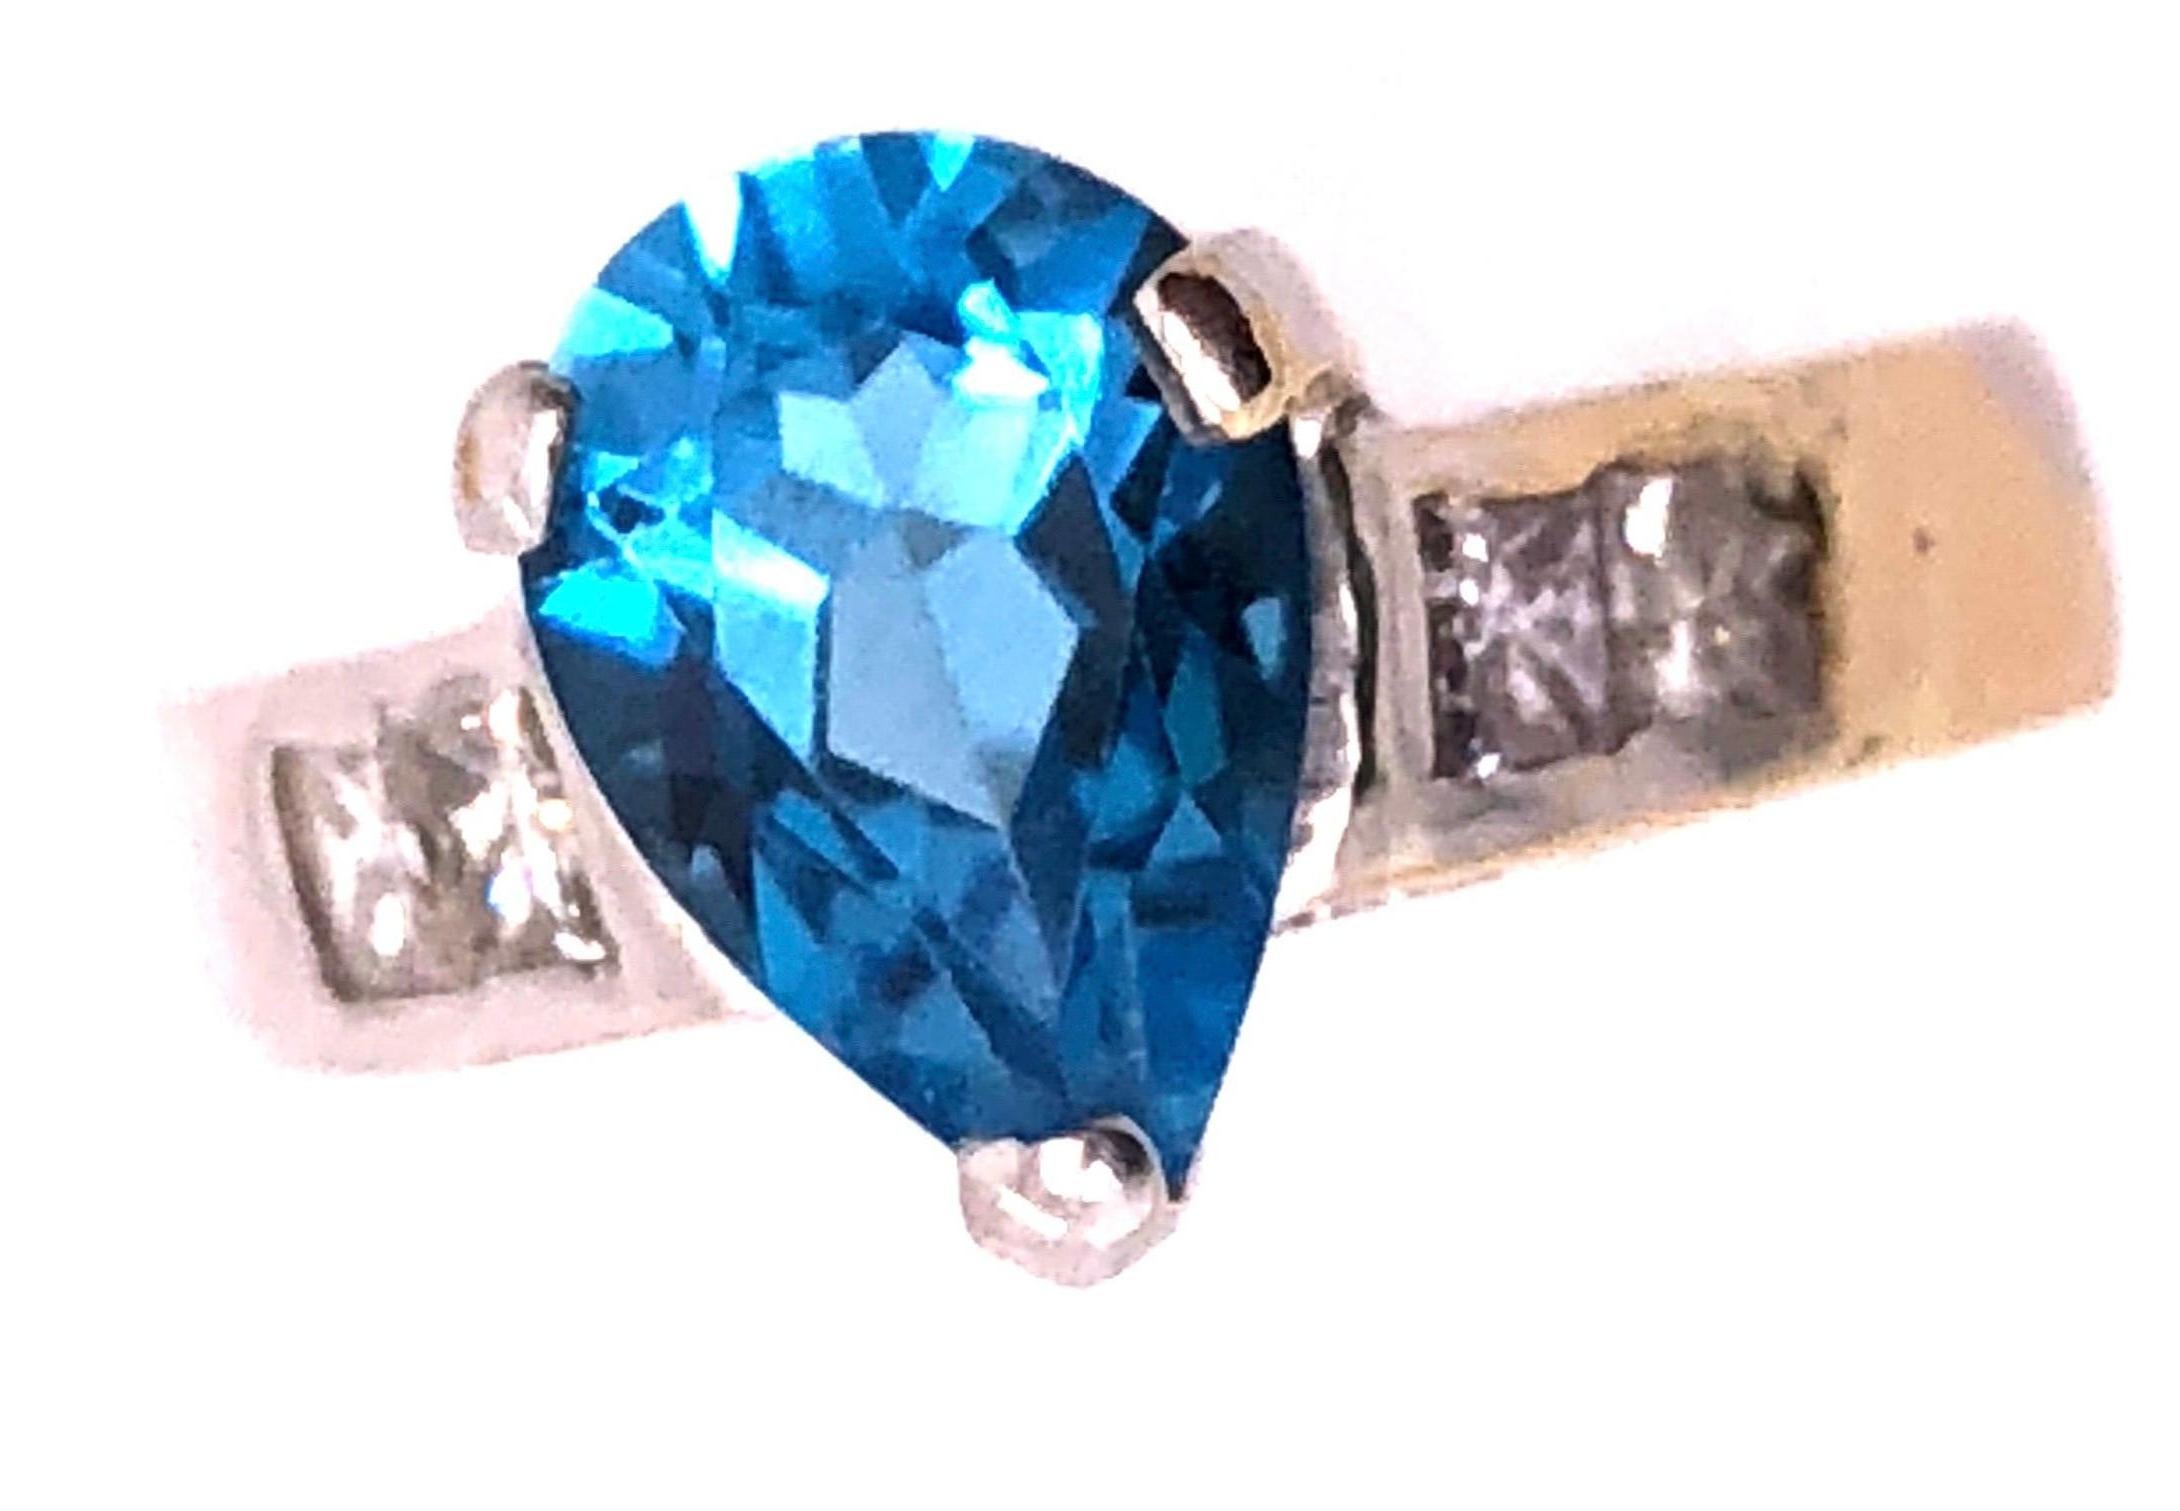 18 Karat White Gold Contemporary Blue Topaz Ring 0.72 Total Diamond Weight.
Size 6.5
4 grams total weight.